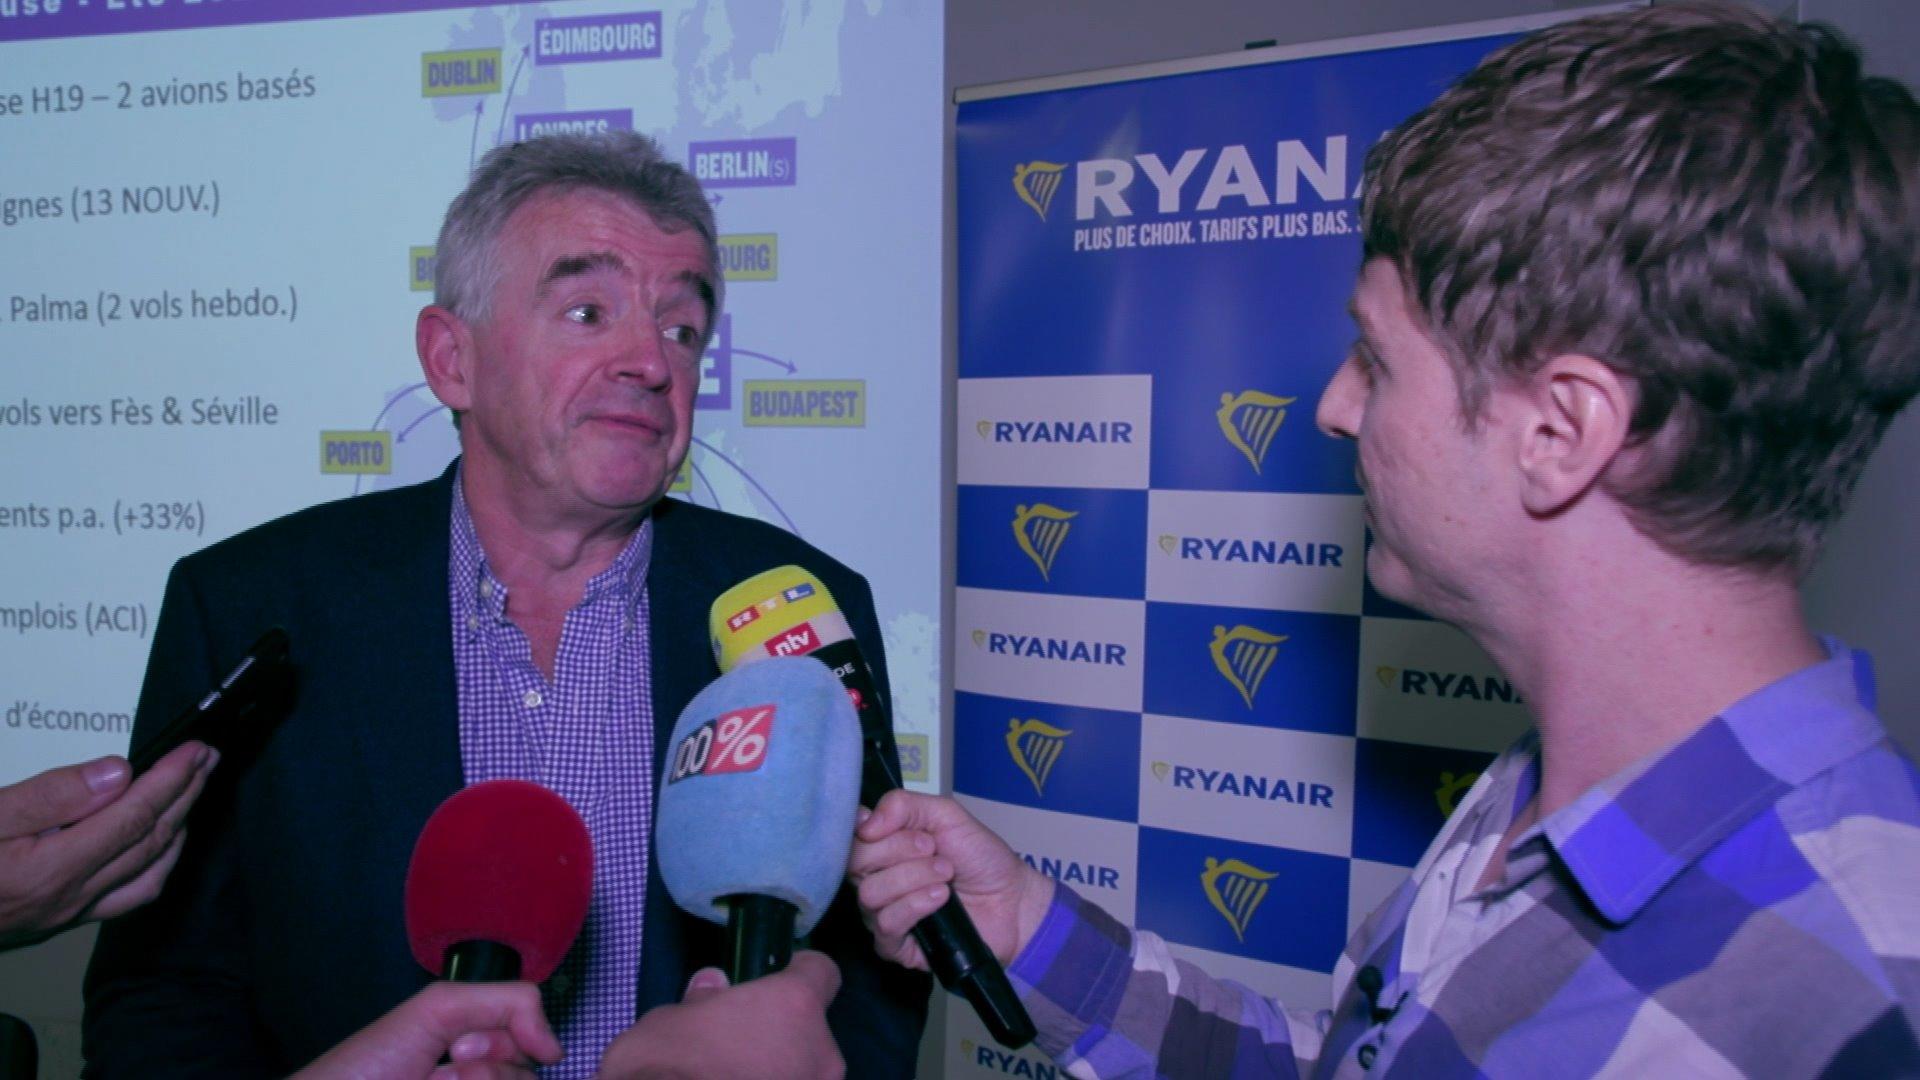 Now Ryanair boss Michael O'Leary speaks up about what's going wrong with the low-cost airline?